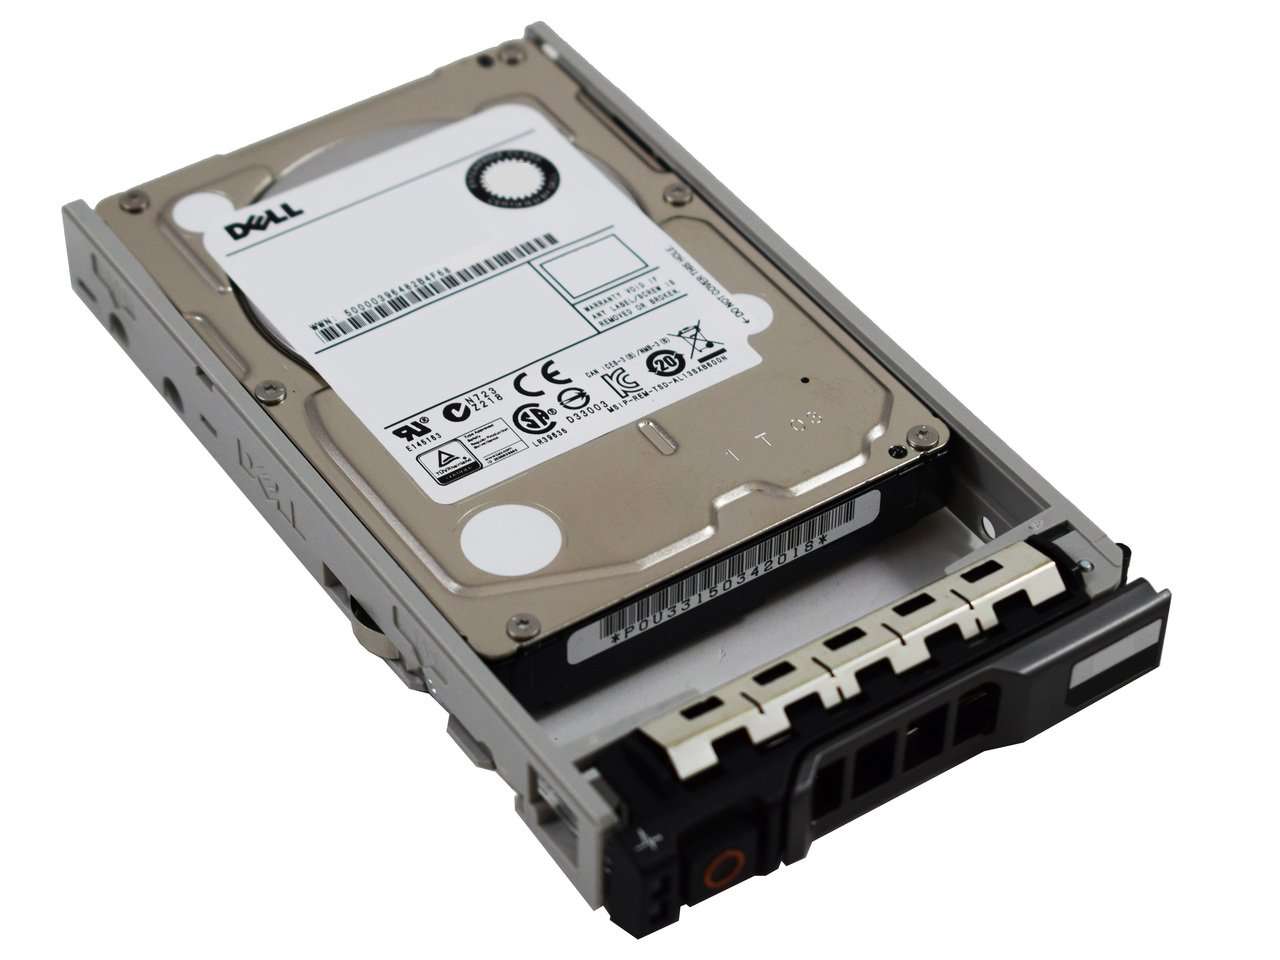 Dell G13 400-AMPF 1.2TB 10K RPM SAS 12Gb/s 512n 2.5" SED Manufacturer Recertified HDD